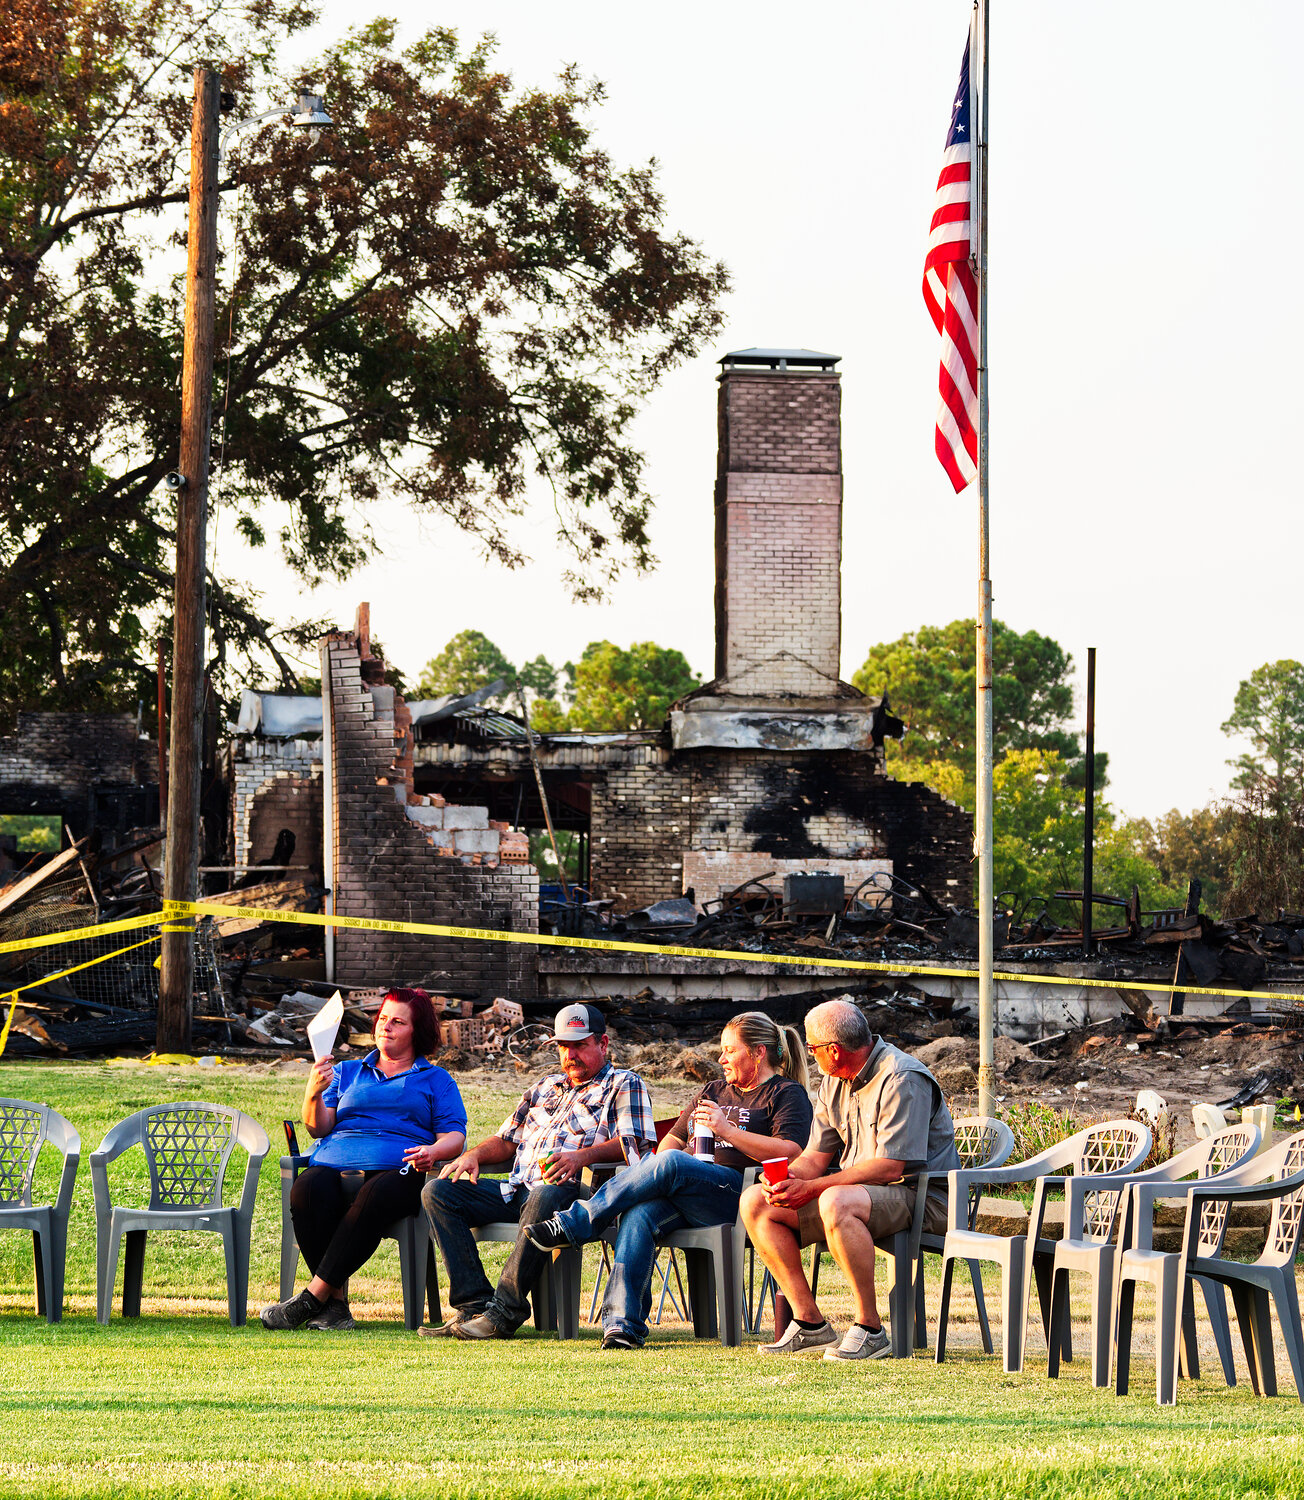 Employees, members and friends gathered on the first tee box just down the hill from the remains of the former clubhouse. [see how the club carries on]